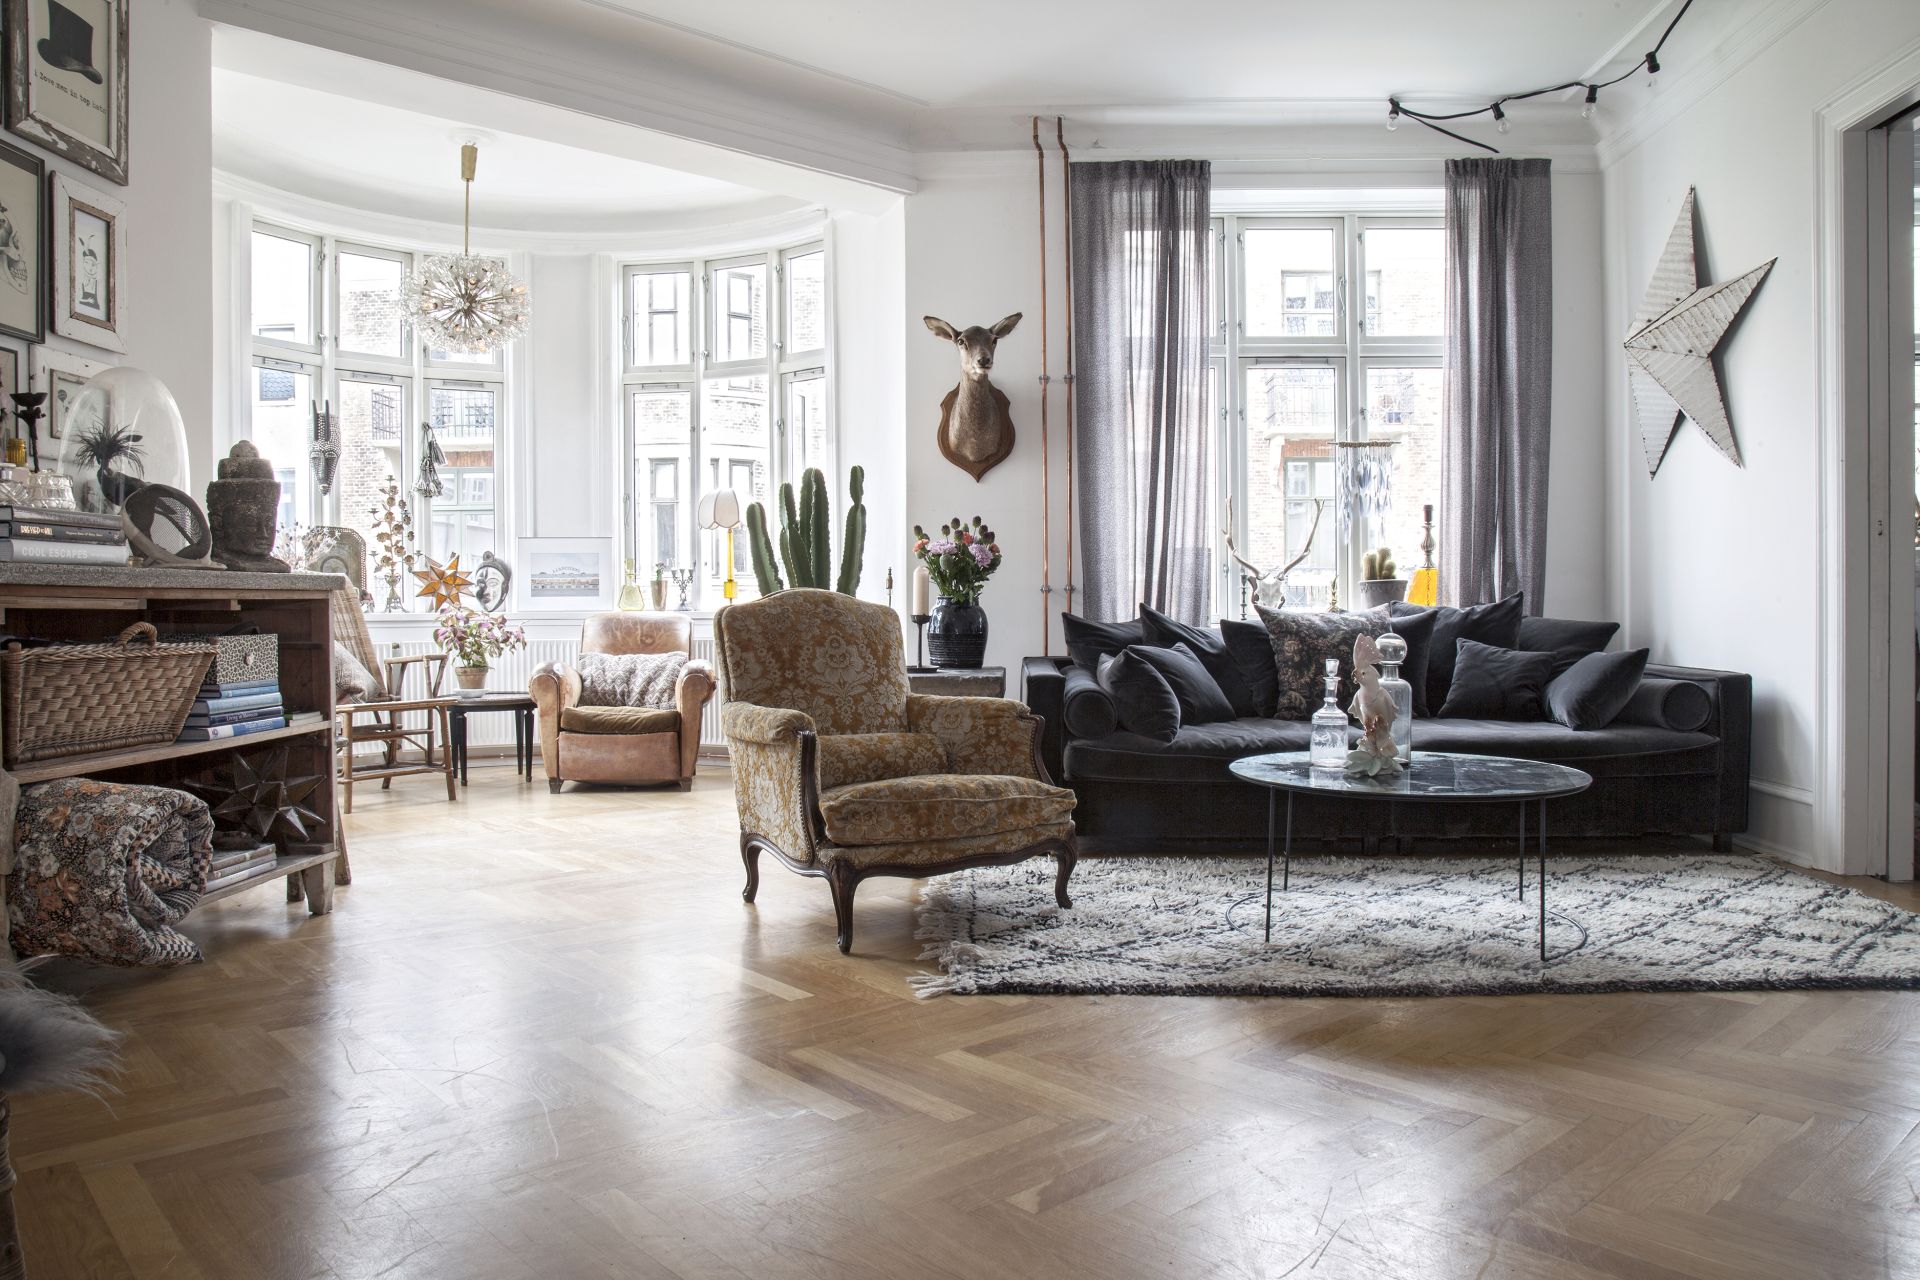 <p>                     We love the whole vibe of this Copenhagen apartment. By mixing so many different styles and textures this room is so unique and full of personality. Recreate that in your living room by picking out furniture that means something to you (even if you think it won't go, that's part of the look).                    </p>                                      <p>                     Start collecting objects and decor that feel personal to your style and layer them up with new pieces to create a very eclectic cozy space, that still has a stylish, contemporary feel.                    </p>